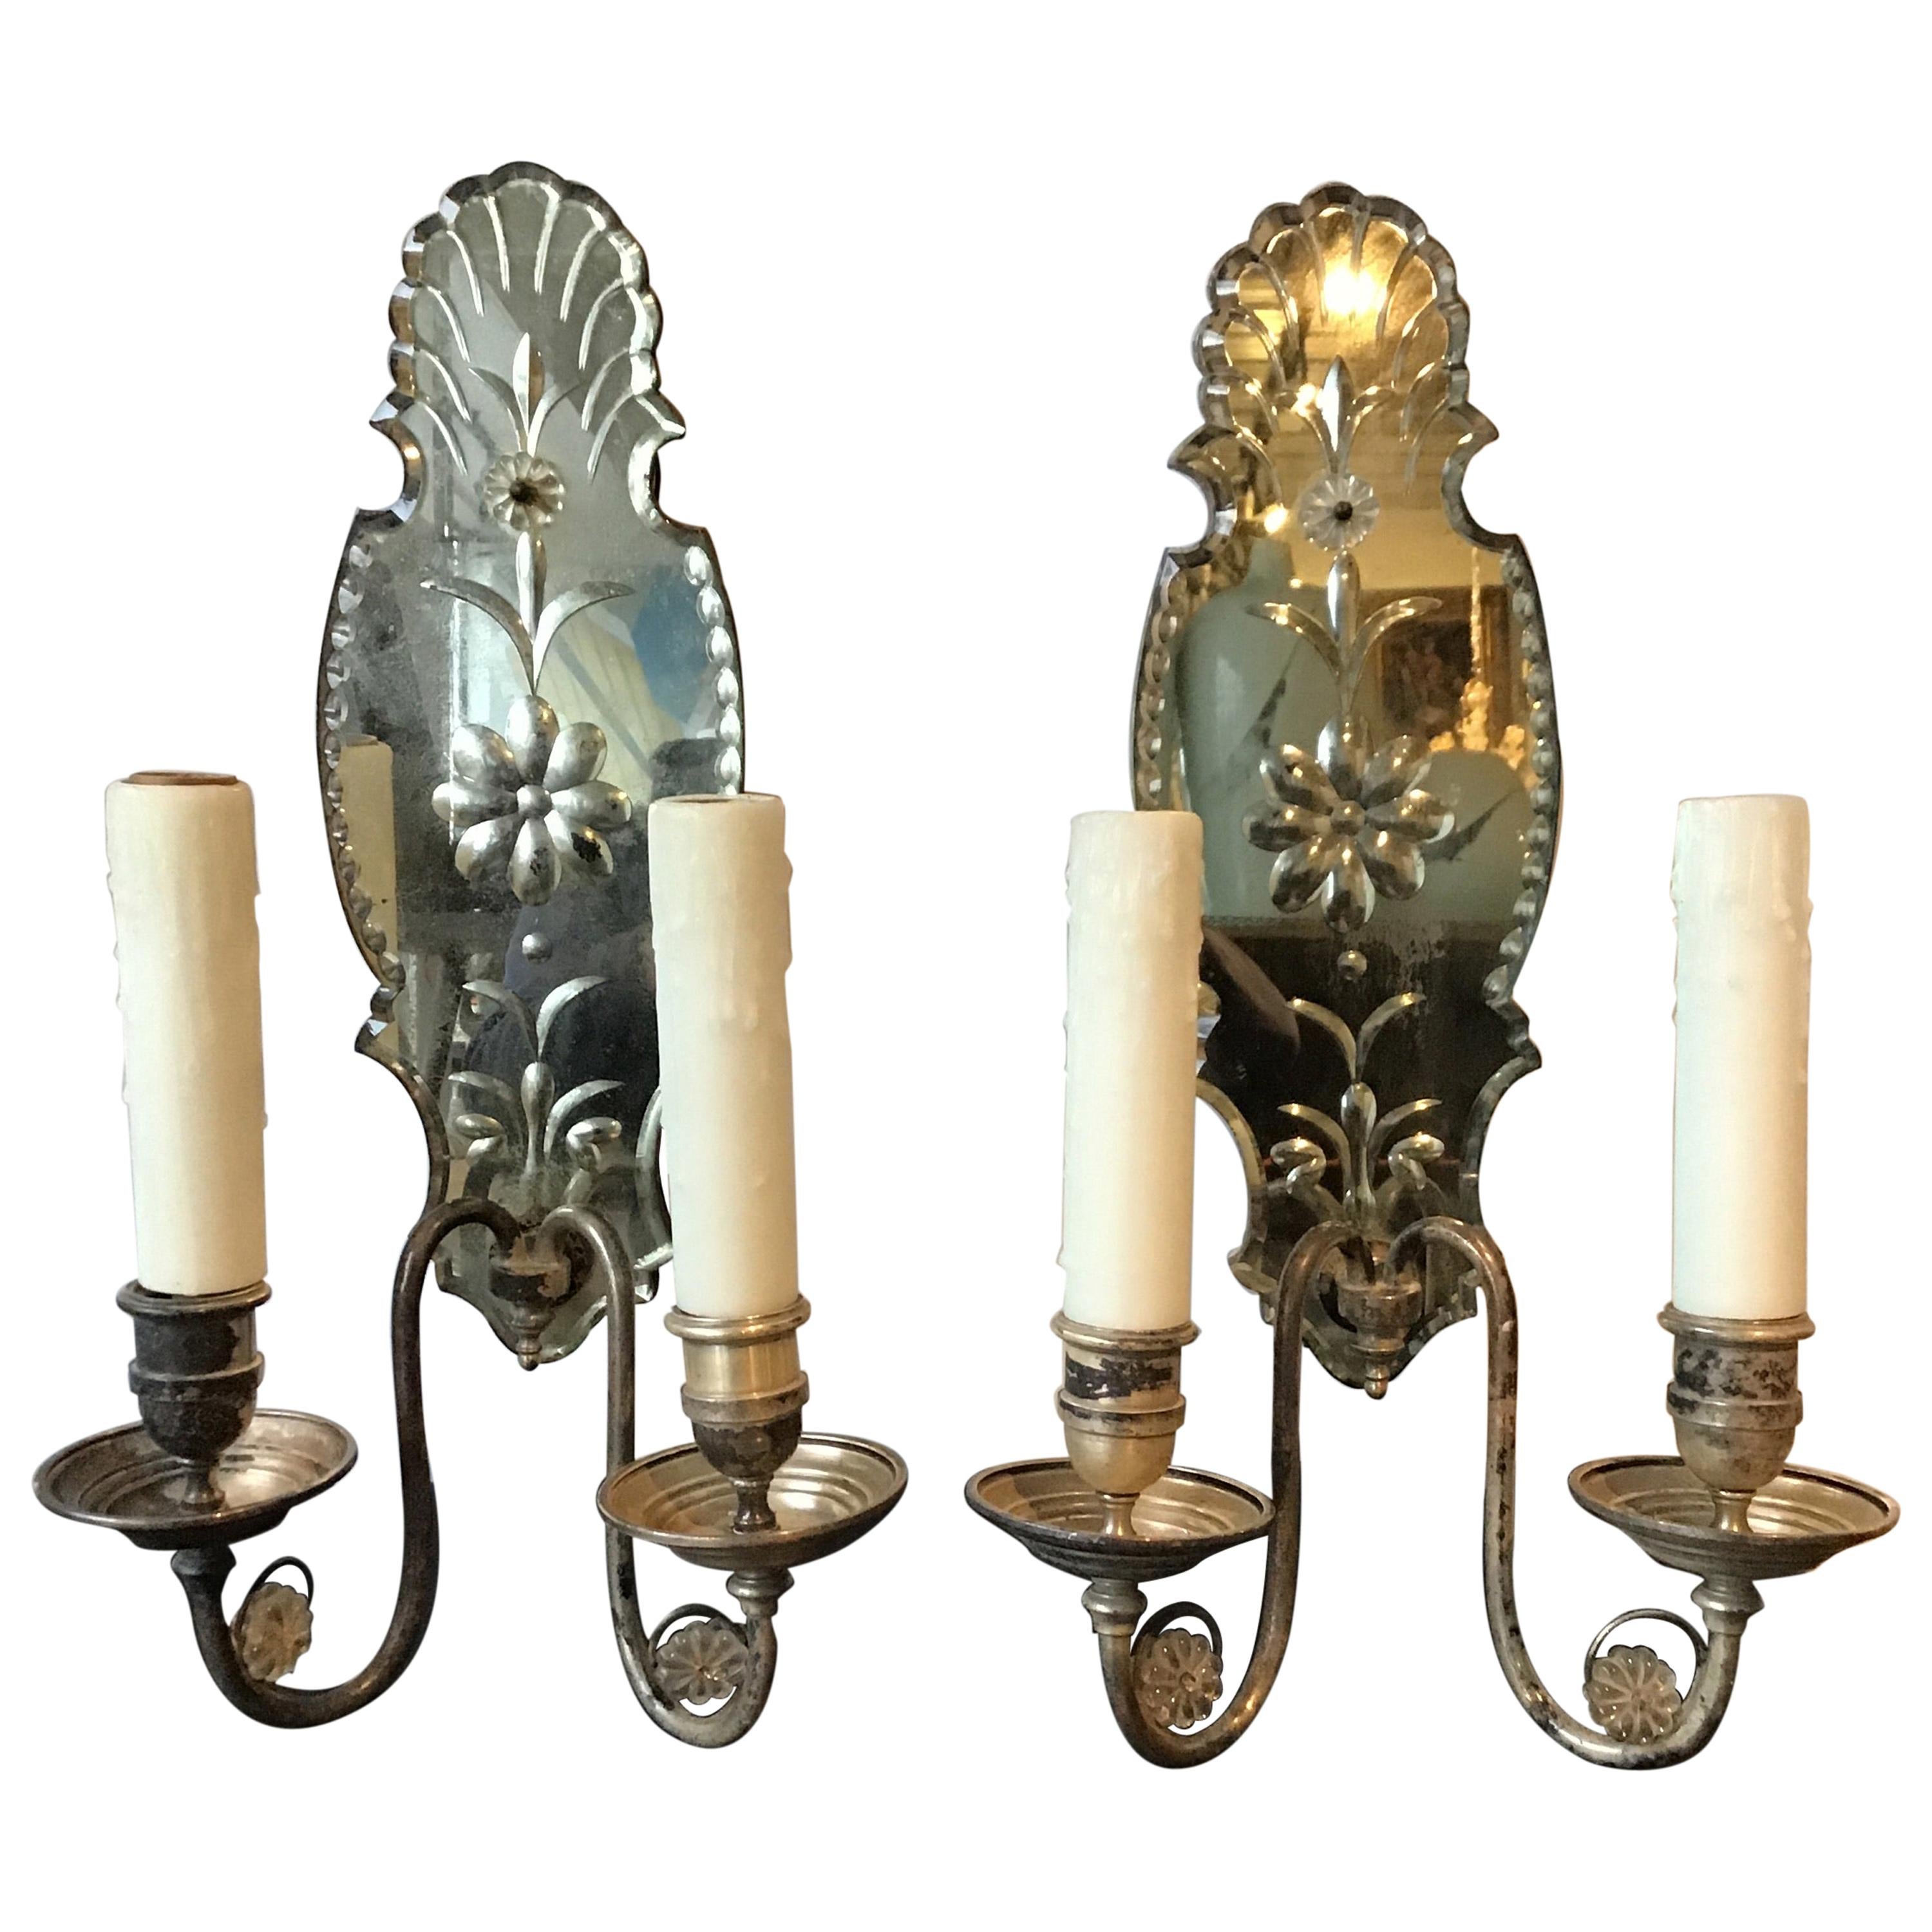 1920s Large Mirrored Sconces